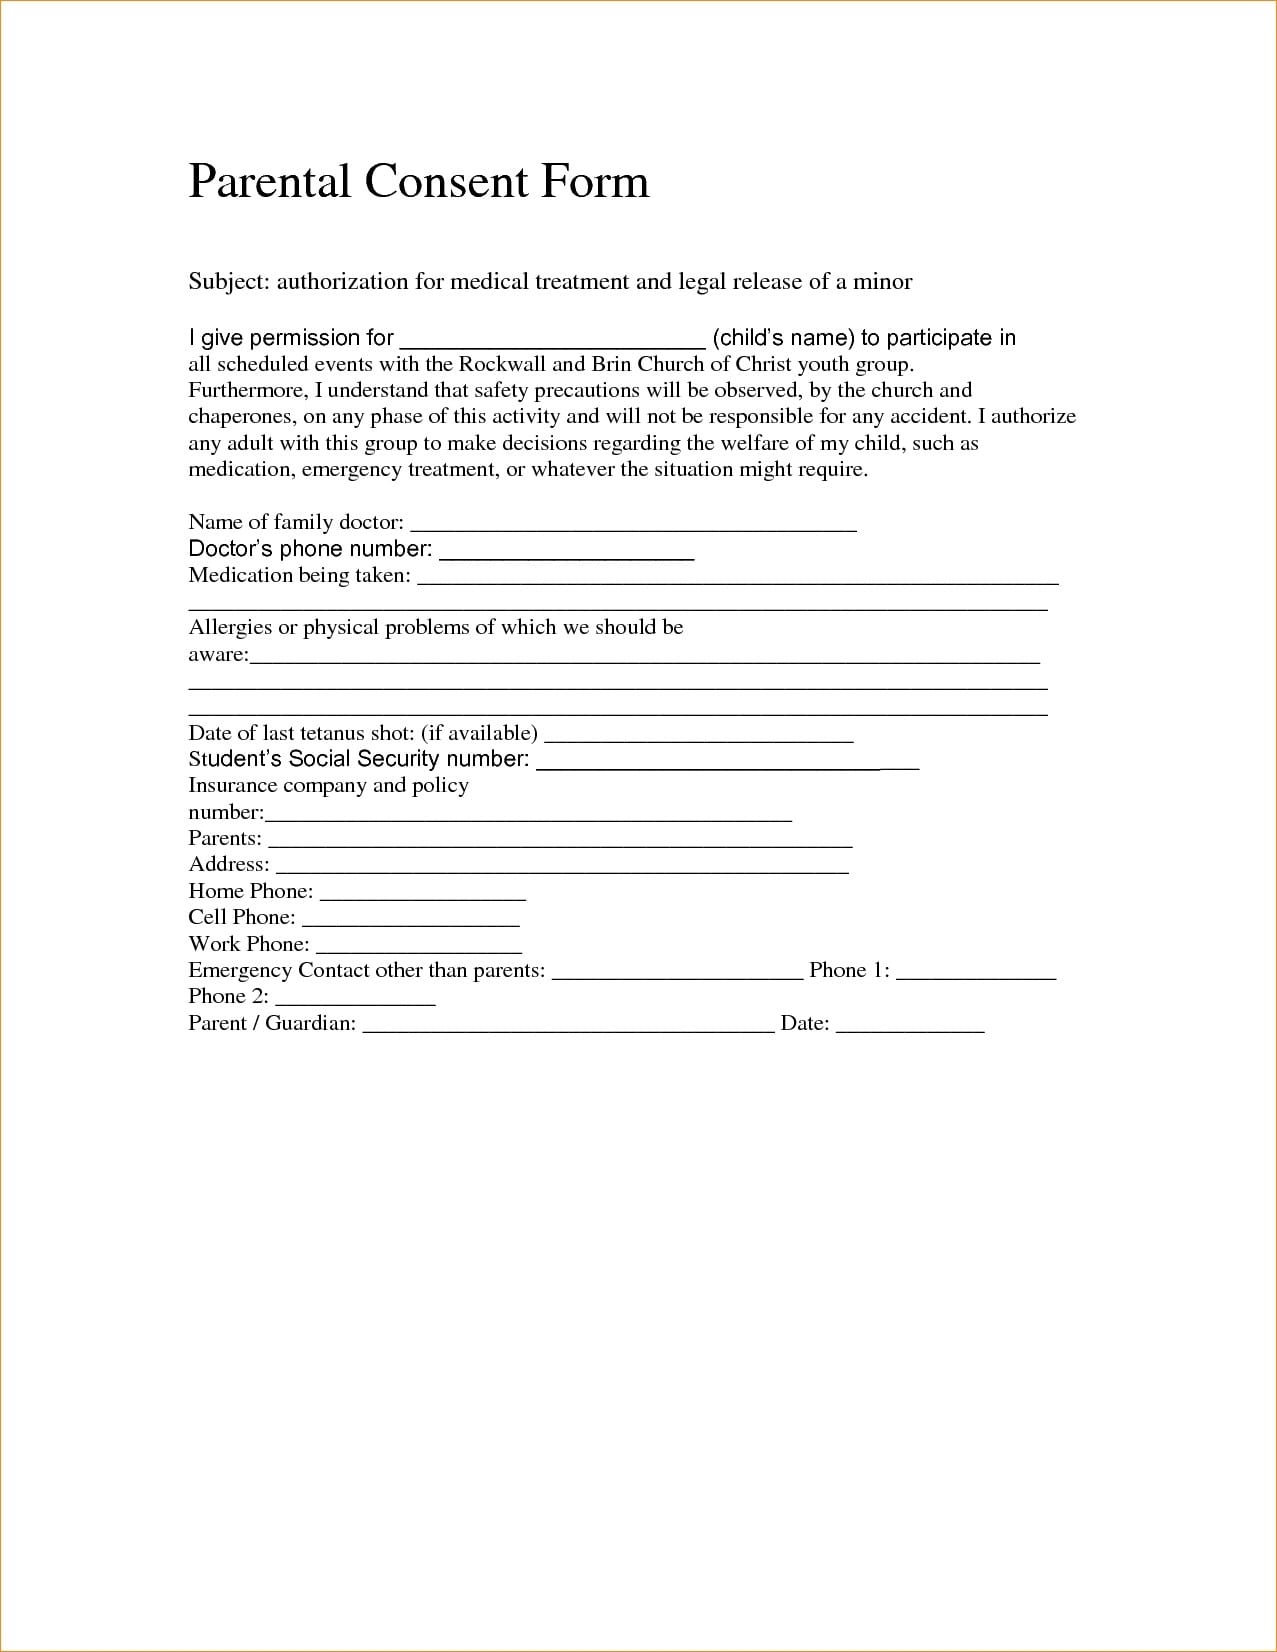 Letter Of Consent/ Medical Authorization Form from images.examples.com